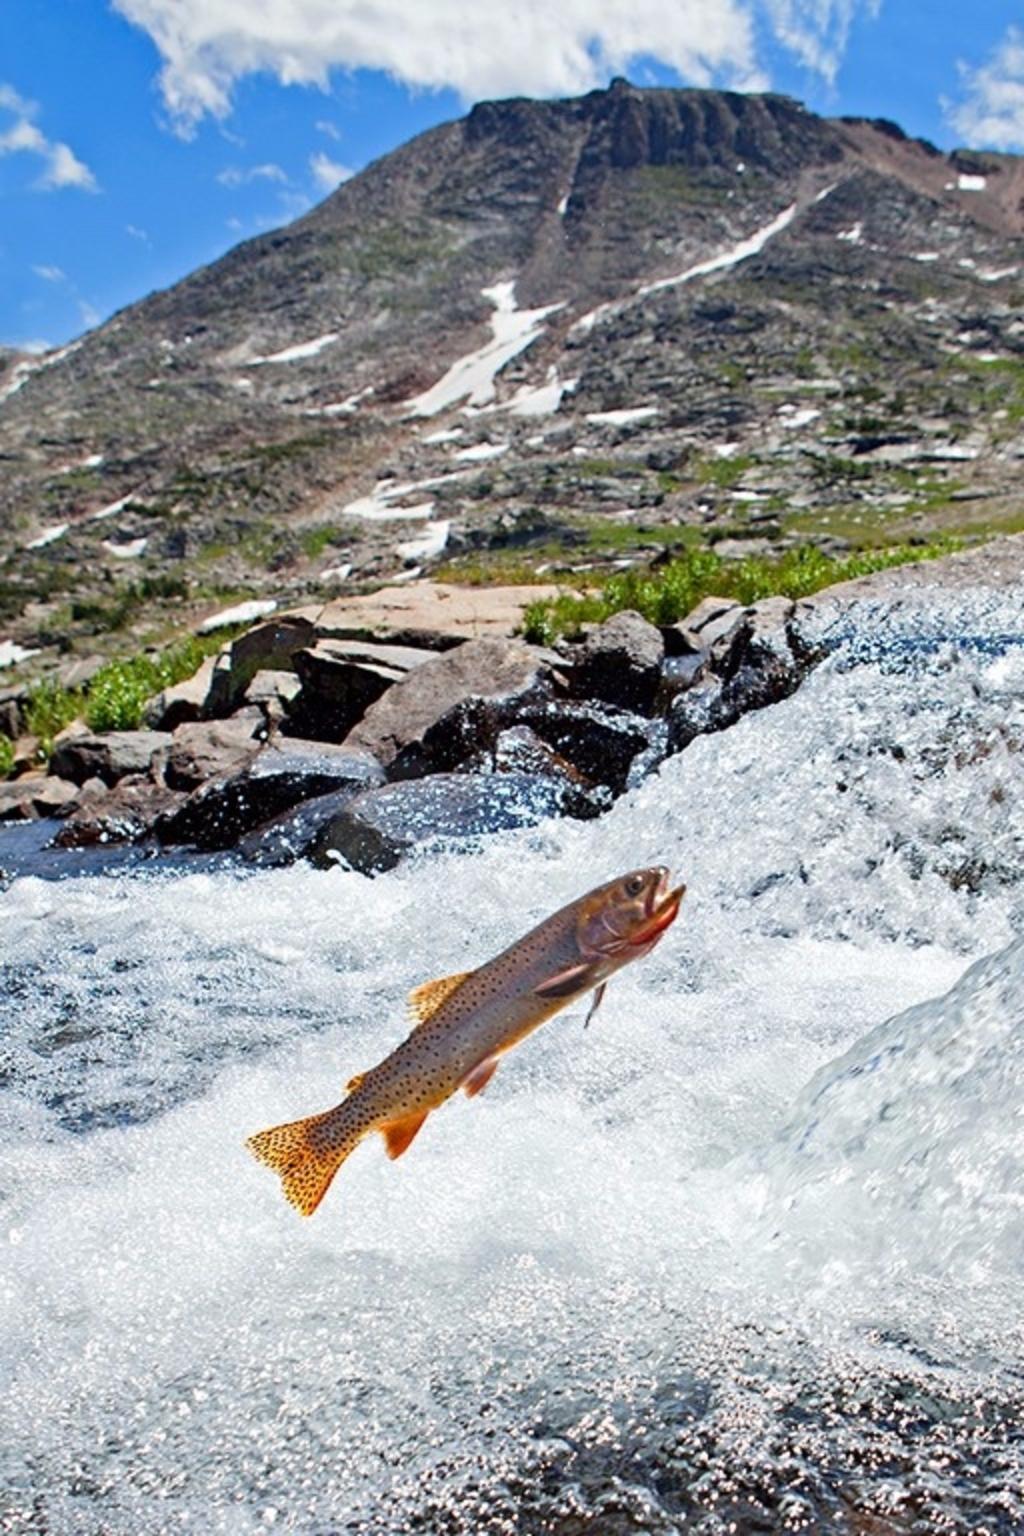 A spawning cutthroat trout attempts to move upstream against the rapids. Somewhere on the Beartooth Plateau, Greater Yellowstone Ecosystem, Montana. Photo courtesy Pat Clayton